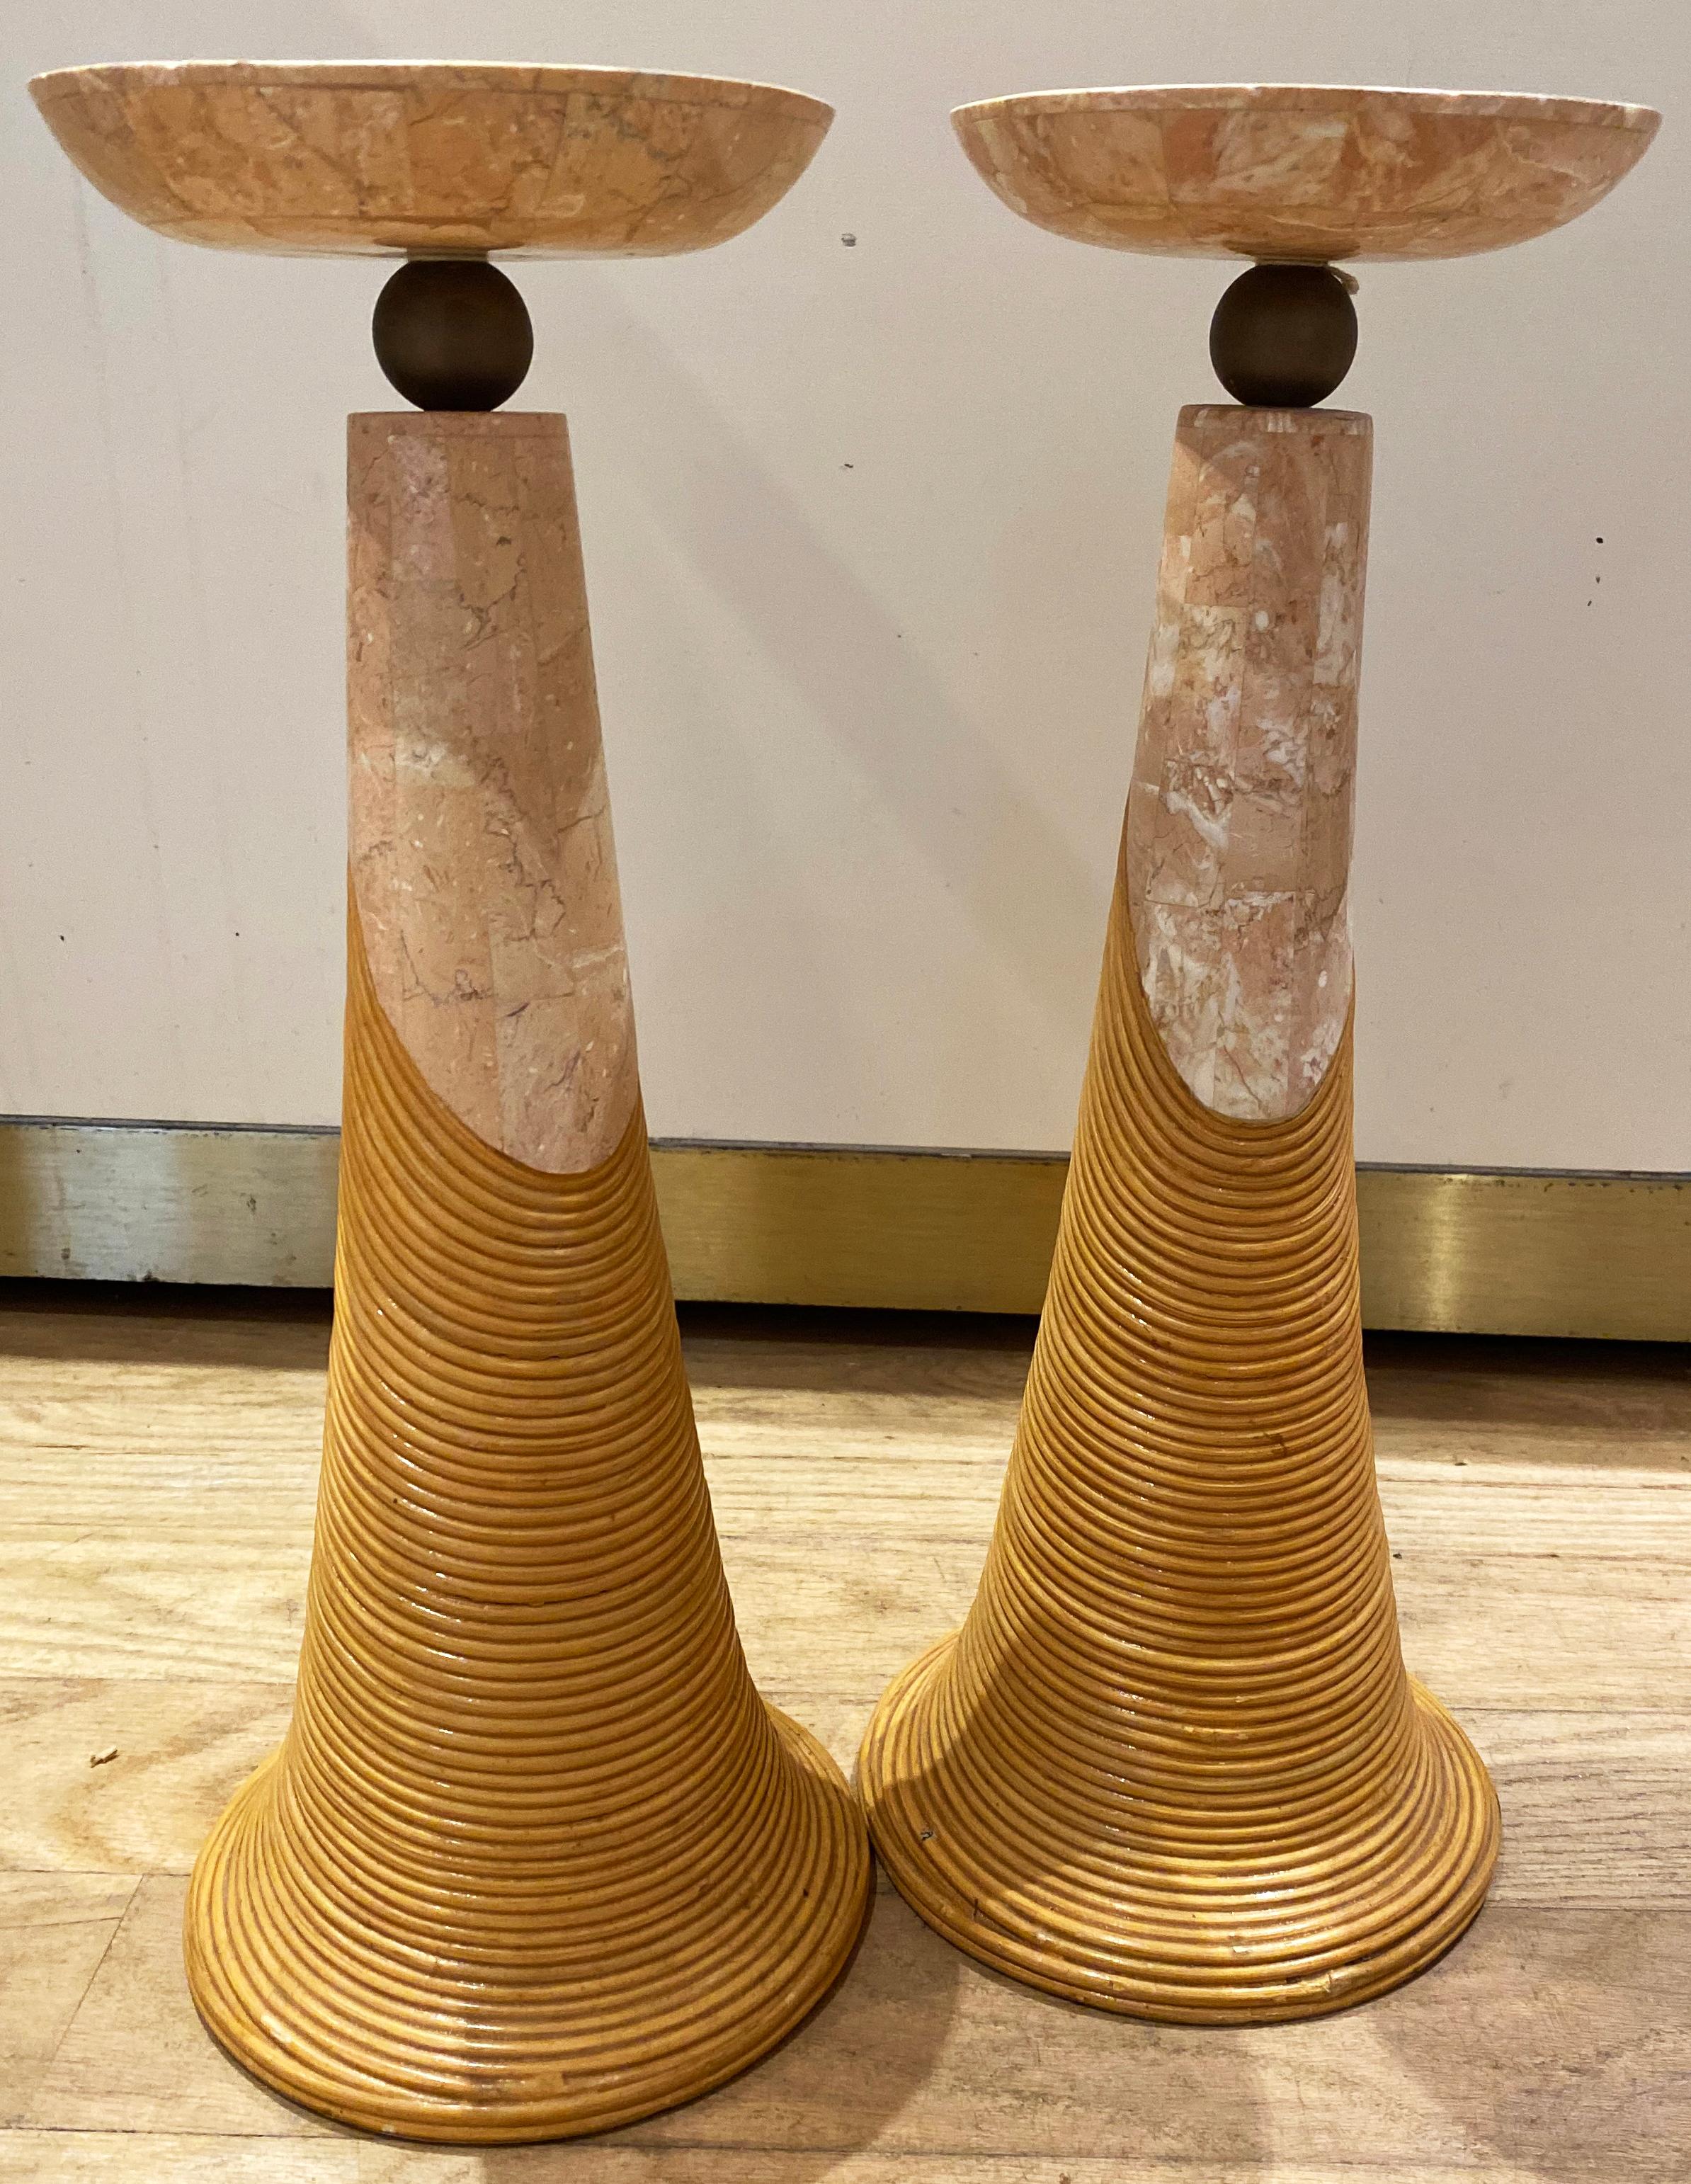 Rare pair of candle holders in tessellated stalactite travertine, pencil reed rattan, and brass. This set is meticulously made in beautiful materials for Karl Springer circa 1980's.